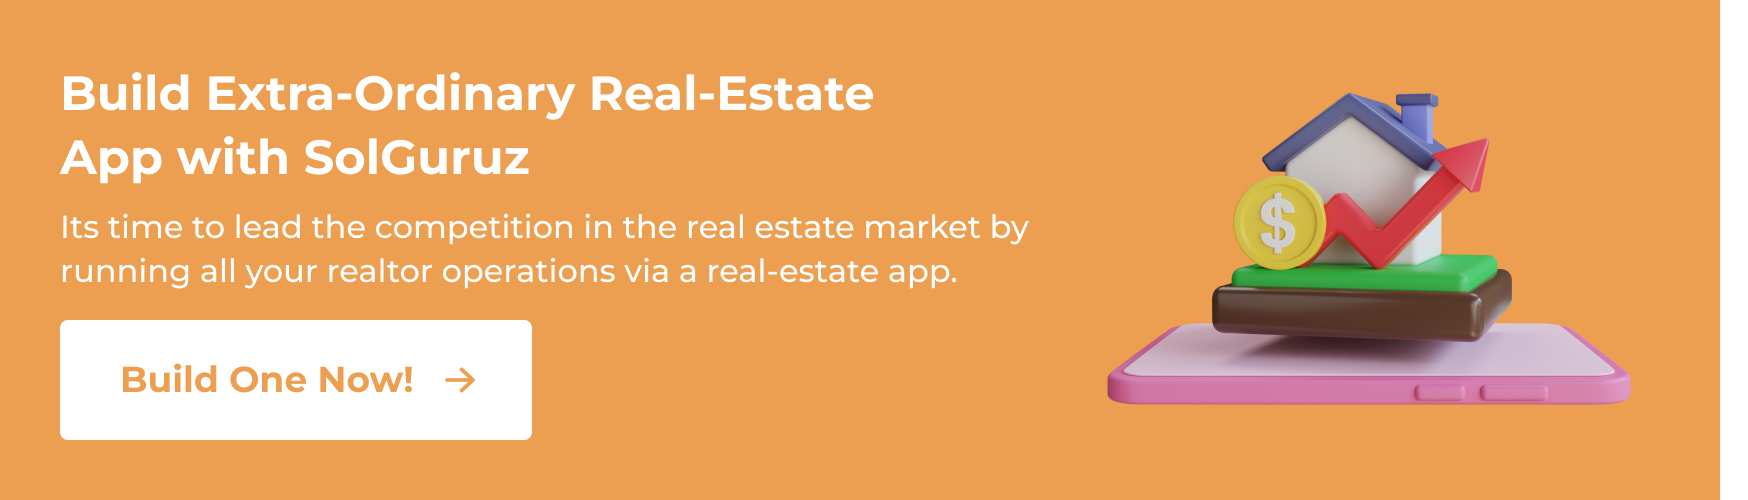 Build Extra-Ordinary Real Estate App with SolGuruz. SolGuruz is a top real estate apps development company in India.